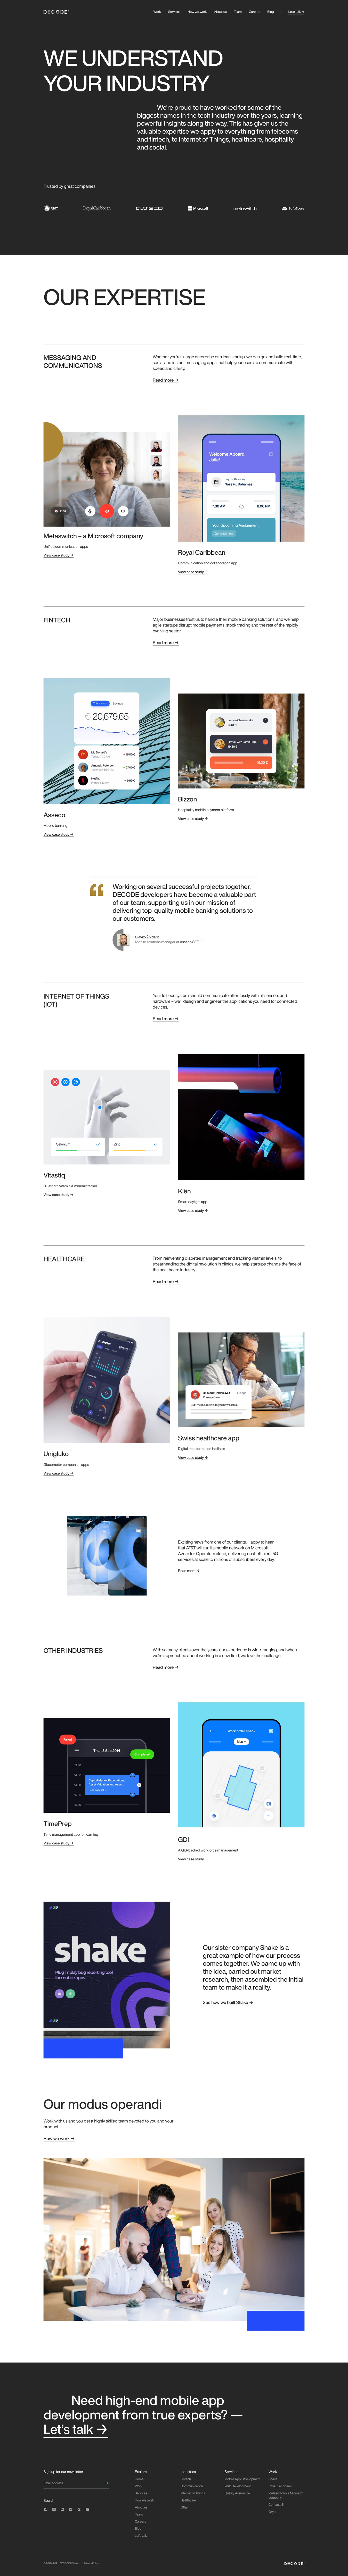 DECODE Landing Page Example: Mobile app development partner for leading software companies. Clients include the world’s leading telco software house Metaswitch (a Microsoft company), Europe’s TOP10 software vendor Asseco...